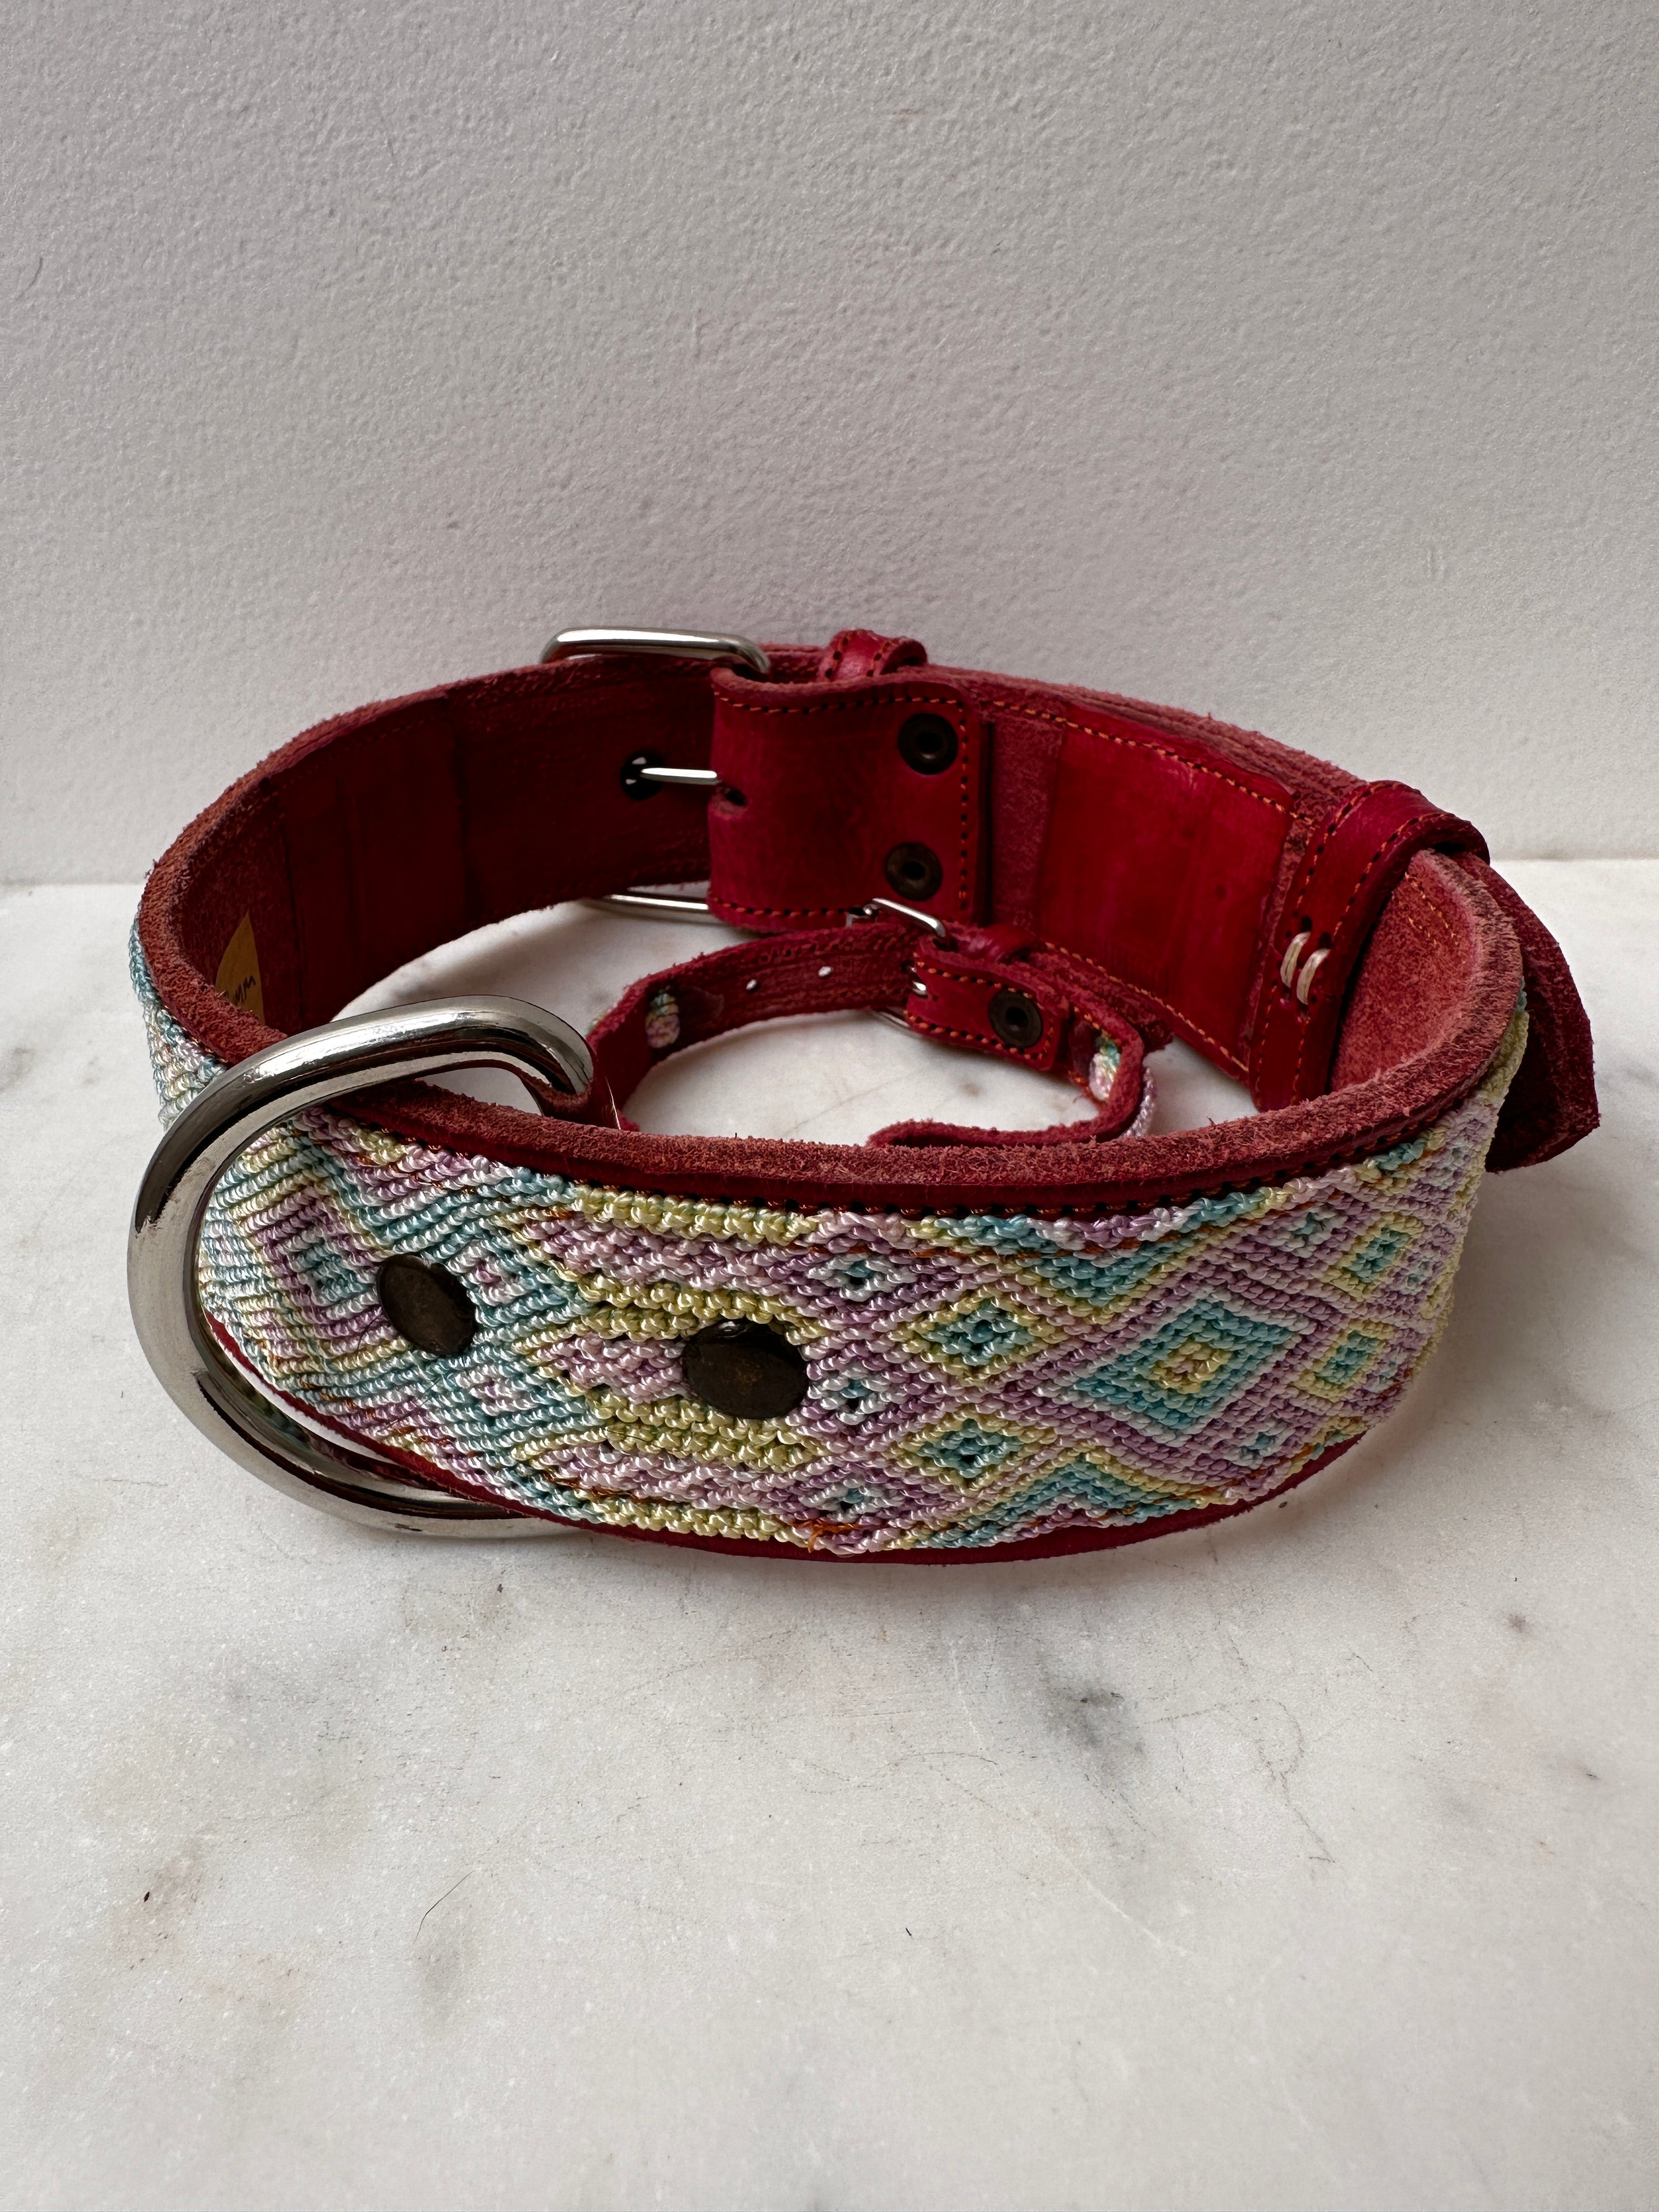 Future Nomads Homewares One Size Huichol Leather Wide Dog Collar L4